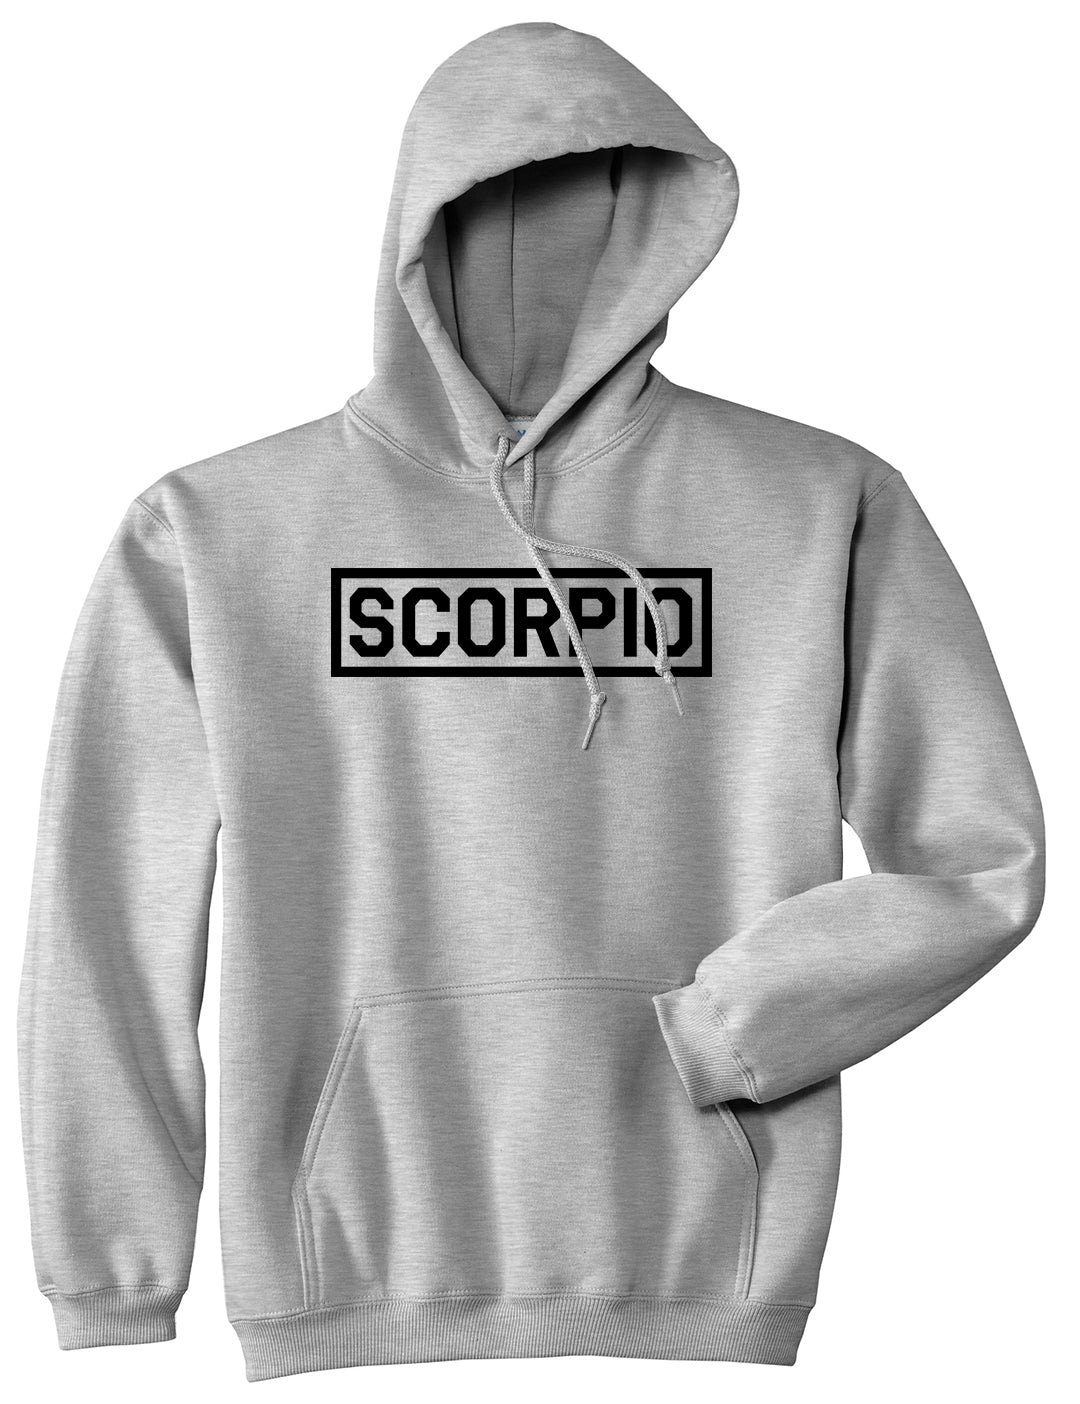 Scorpio Horoscope Sign Mens Grey Pullover Hoodie by KINGS OF NY